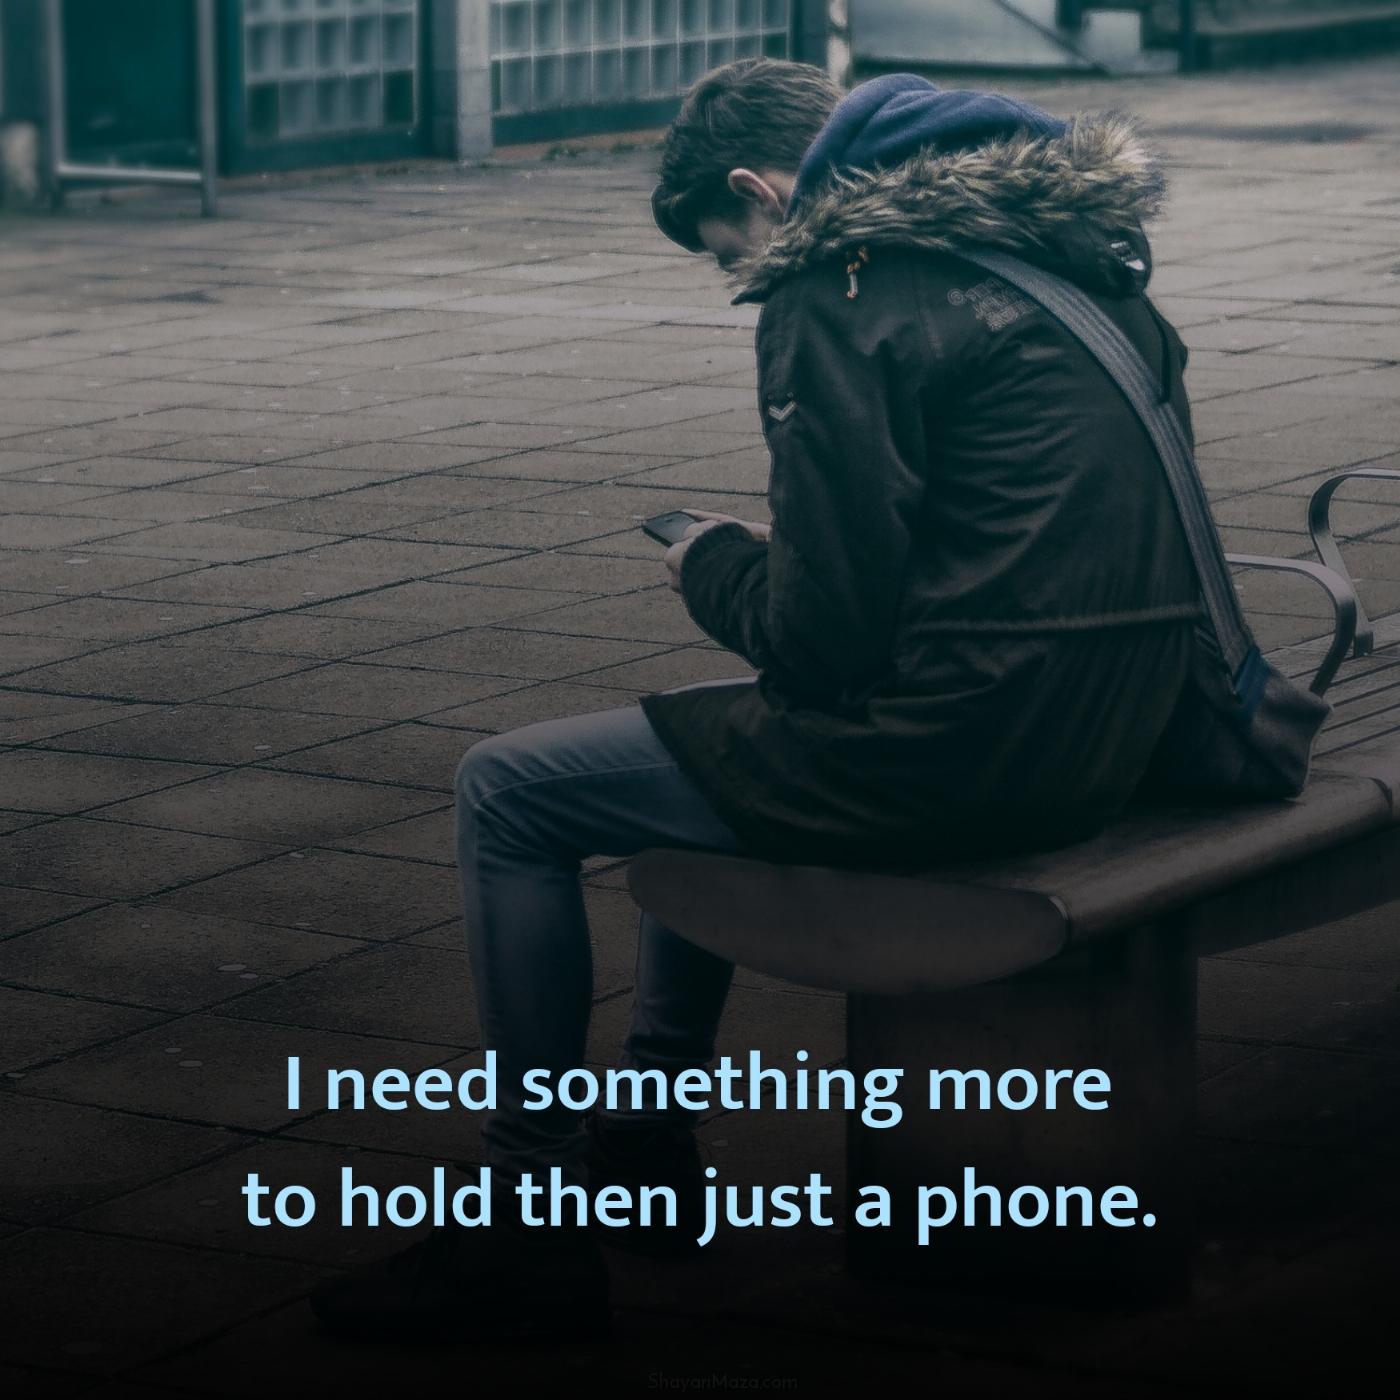 I need something more to hold then just a phone